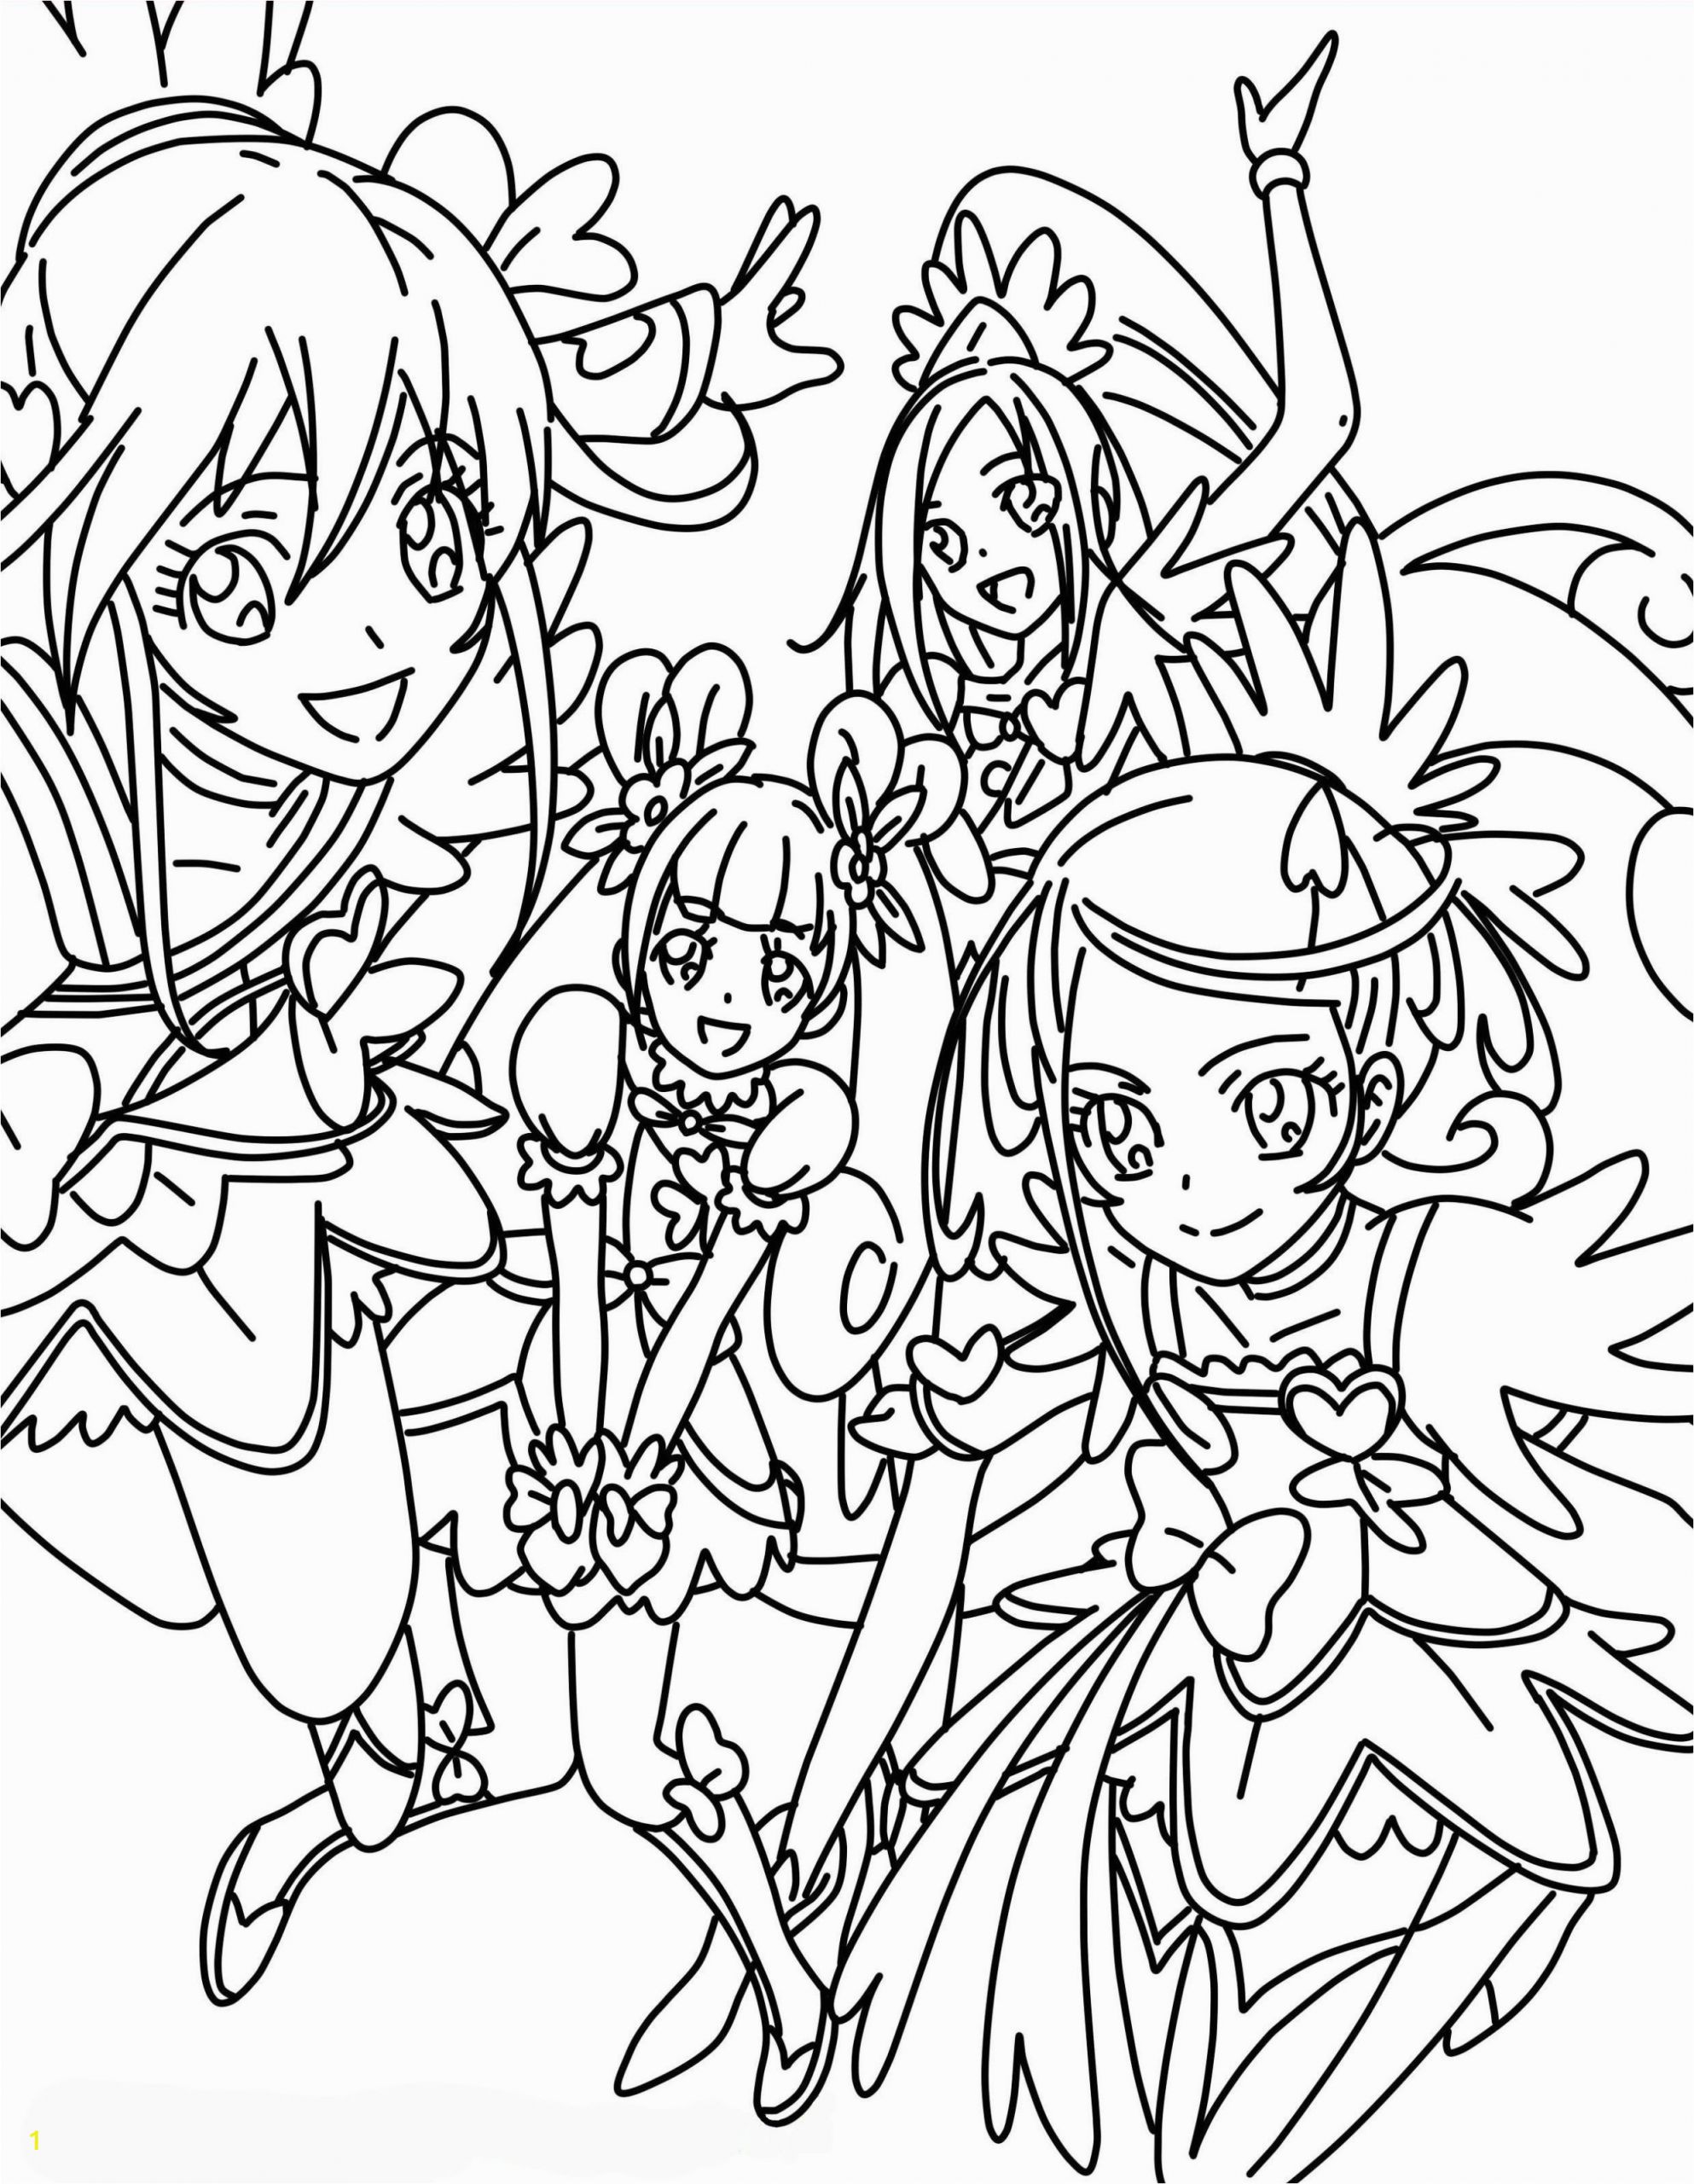 Glitter force Doki Doki Coloring Pages Dokidoki Precure Coloring Pages. 